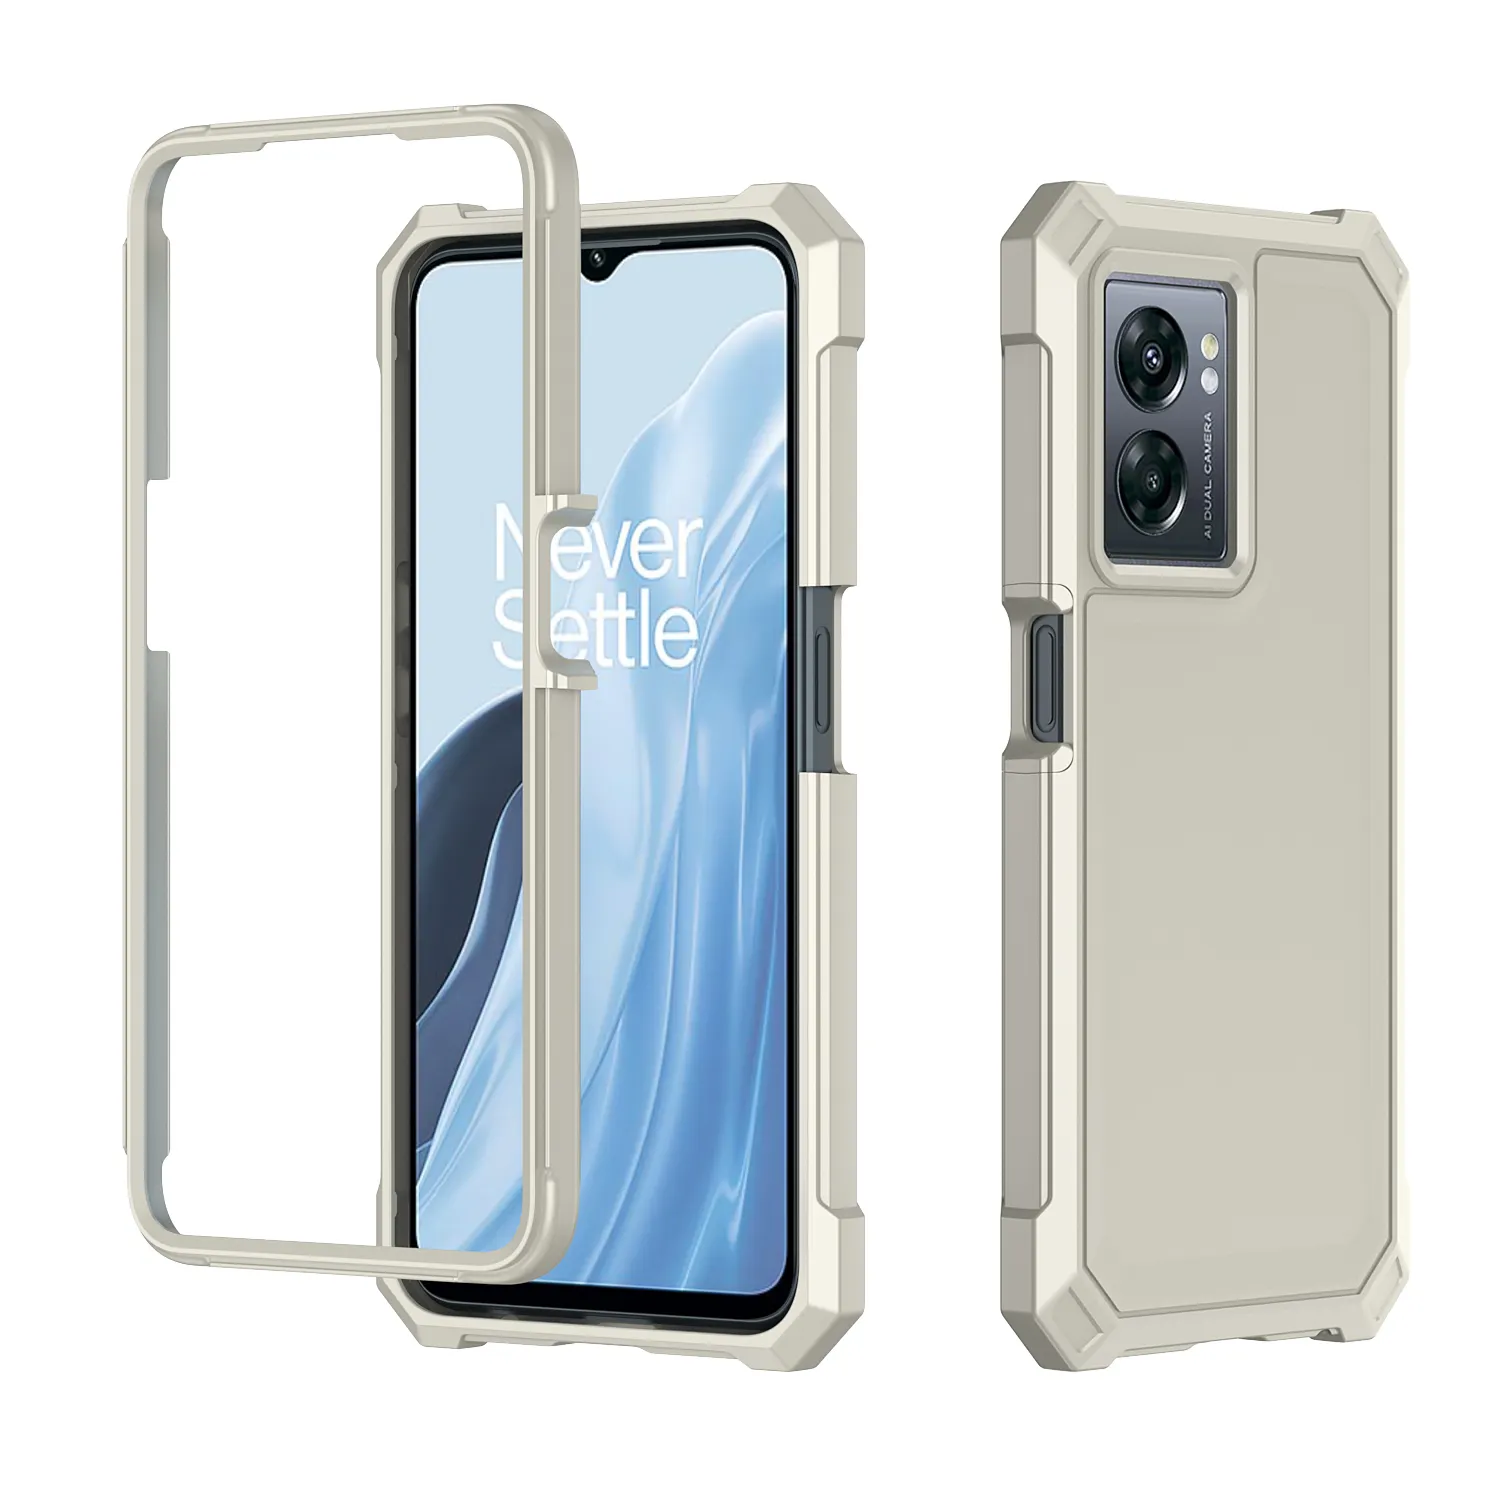 Designed For TCL 405 406 408 360 Full Cover Handphone Case for TCL ION X 20XE 30XE 40XE Phone Case With Hight Quality